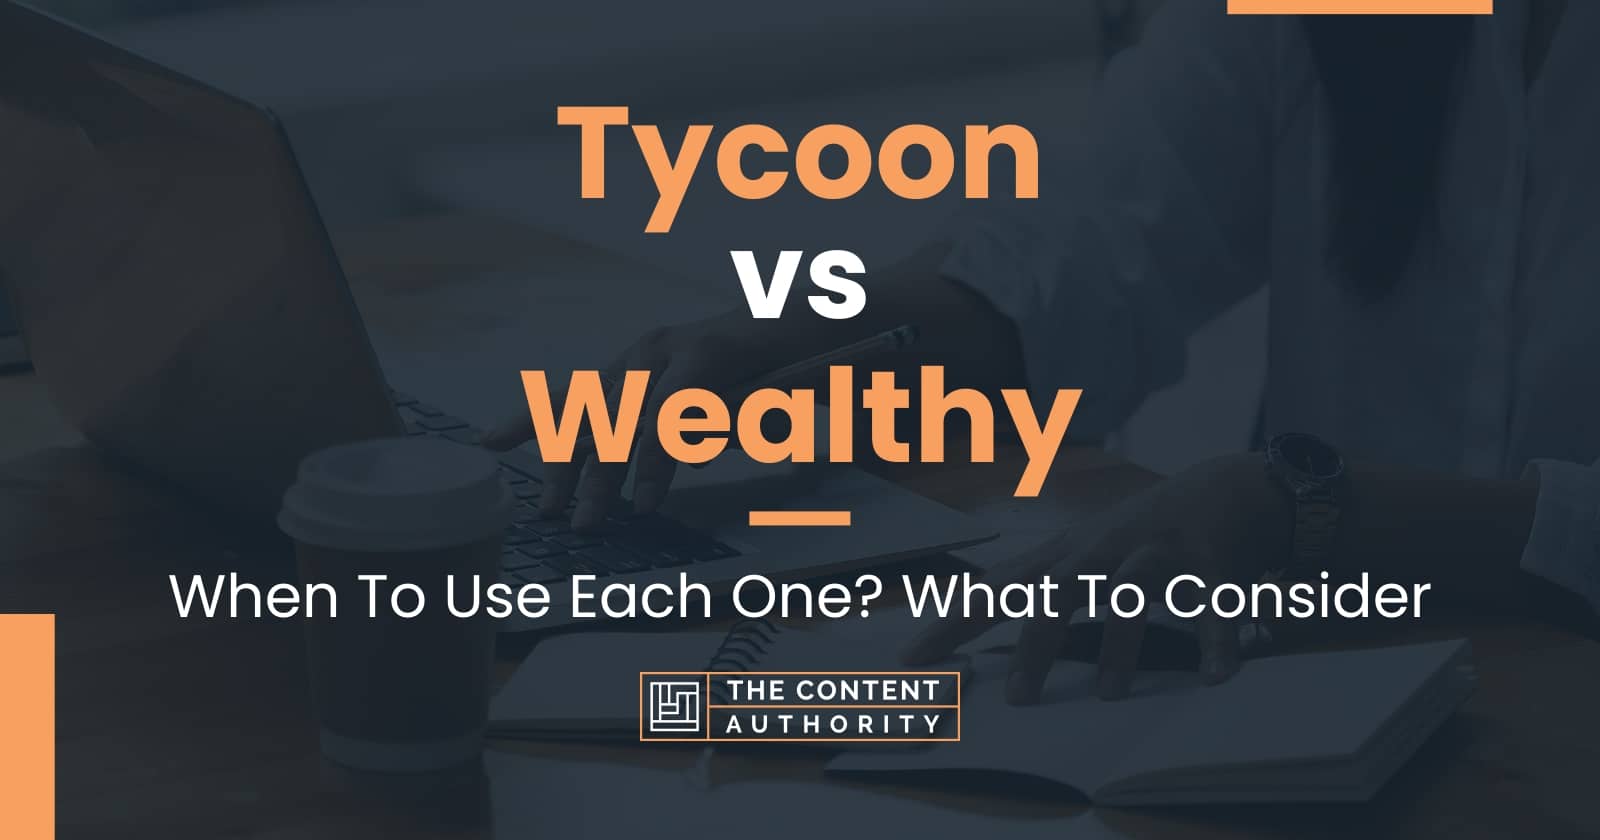 tycoon (【Noun】a rich and powerful businessperson ) Meaning